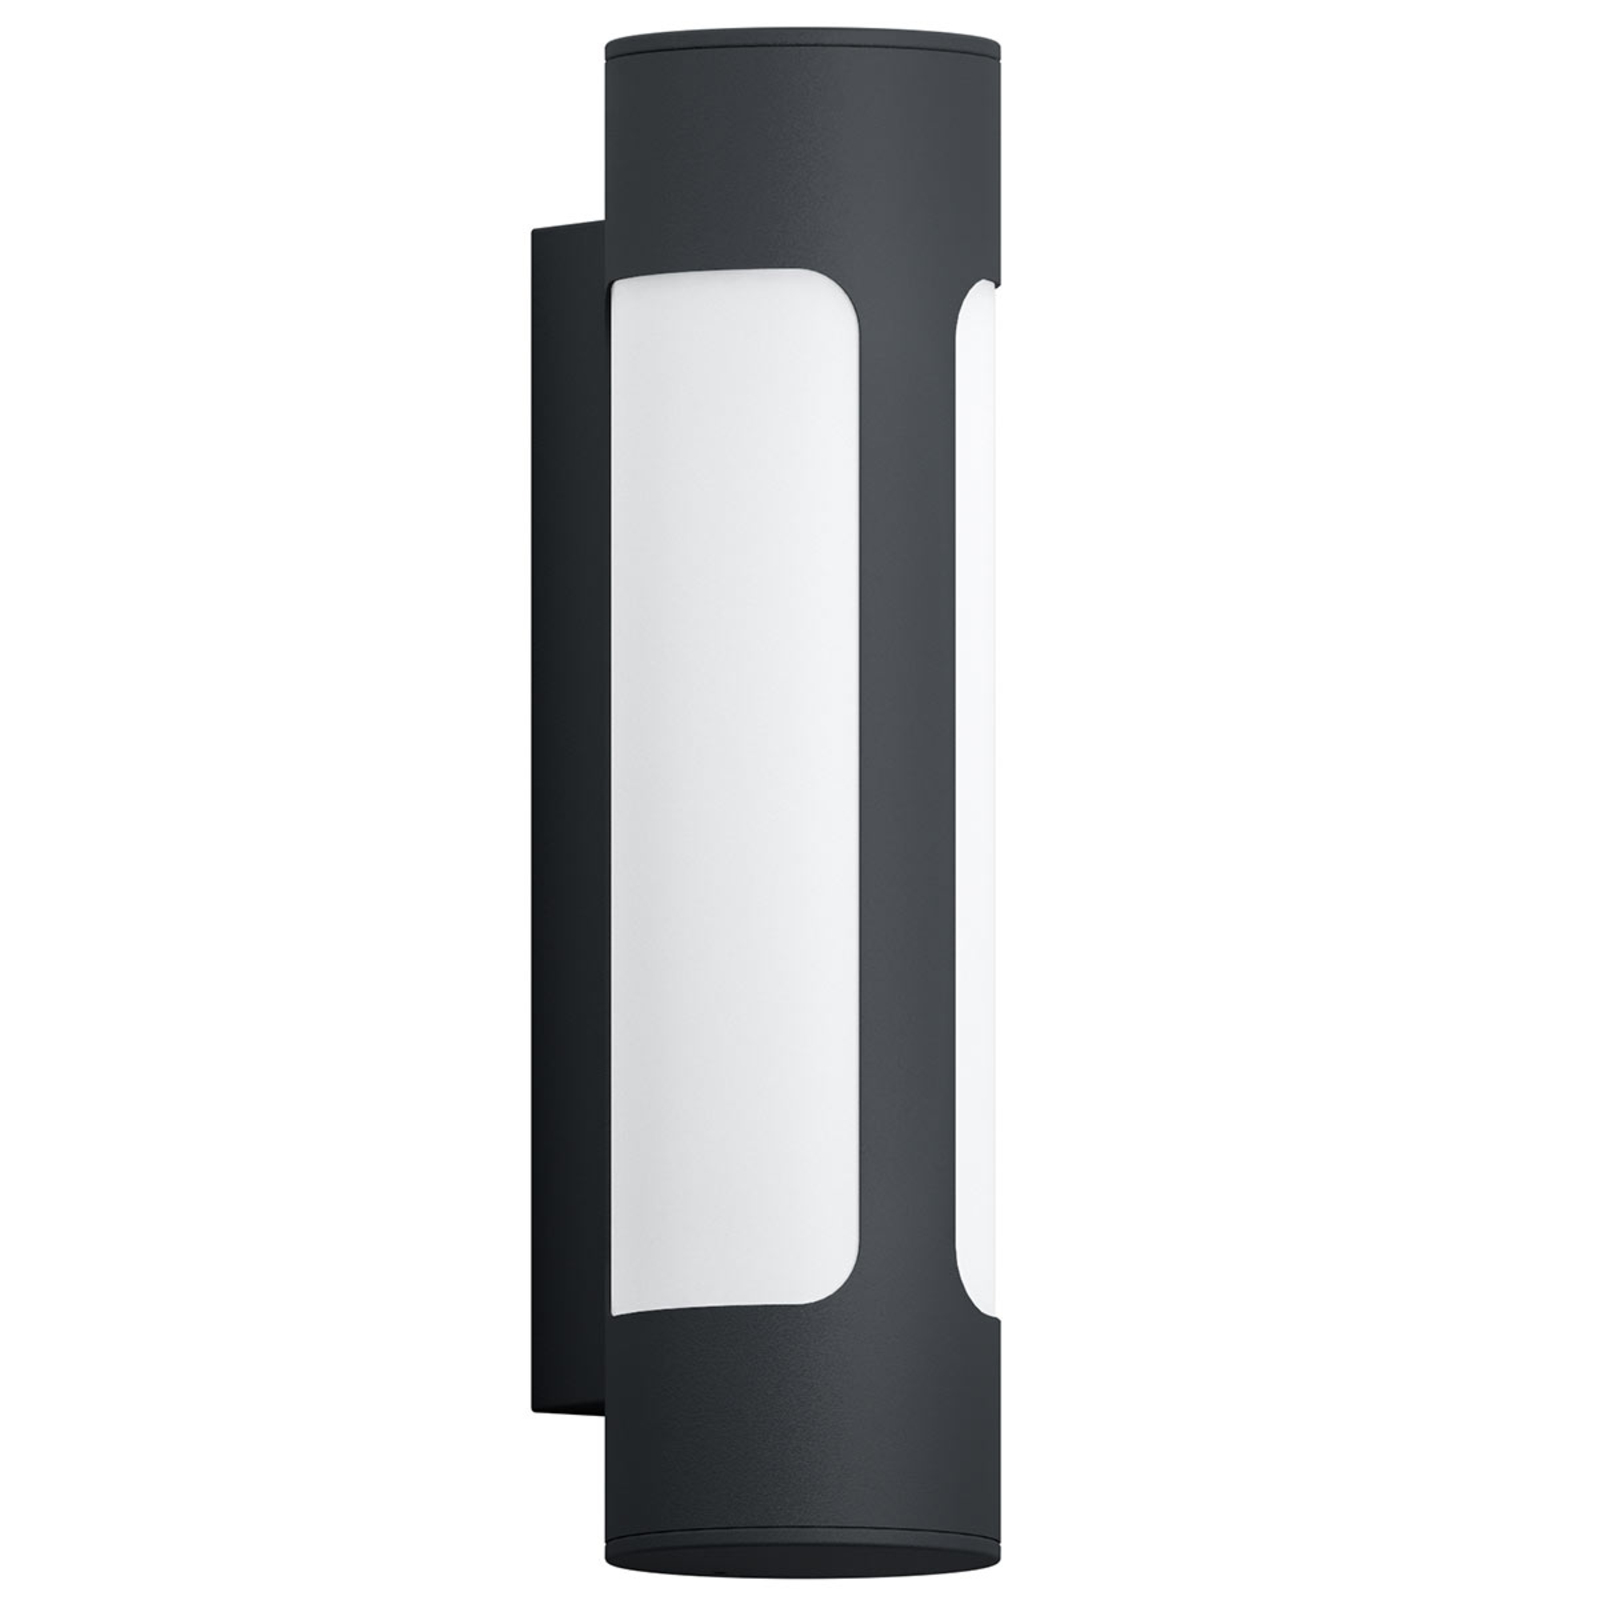 Tonego - LED outdoor wall light in a modern look